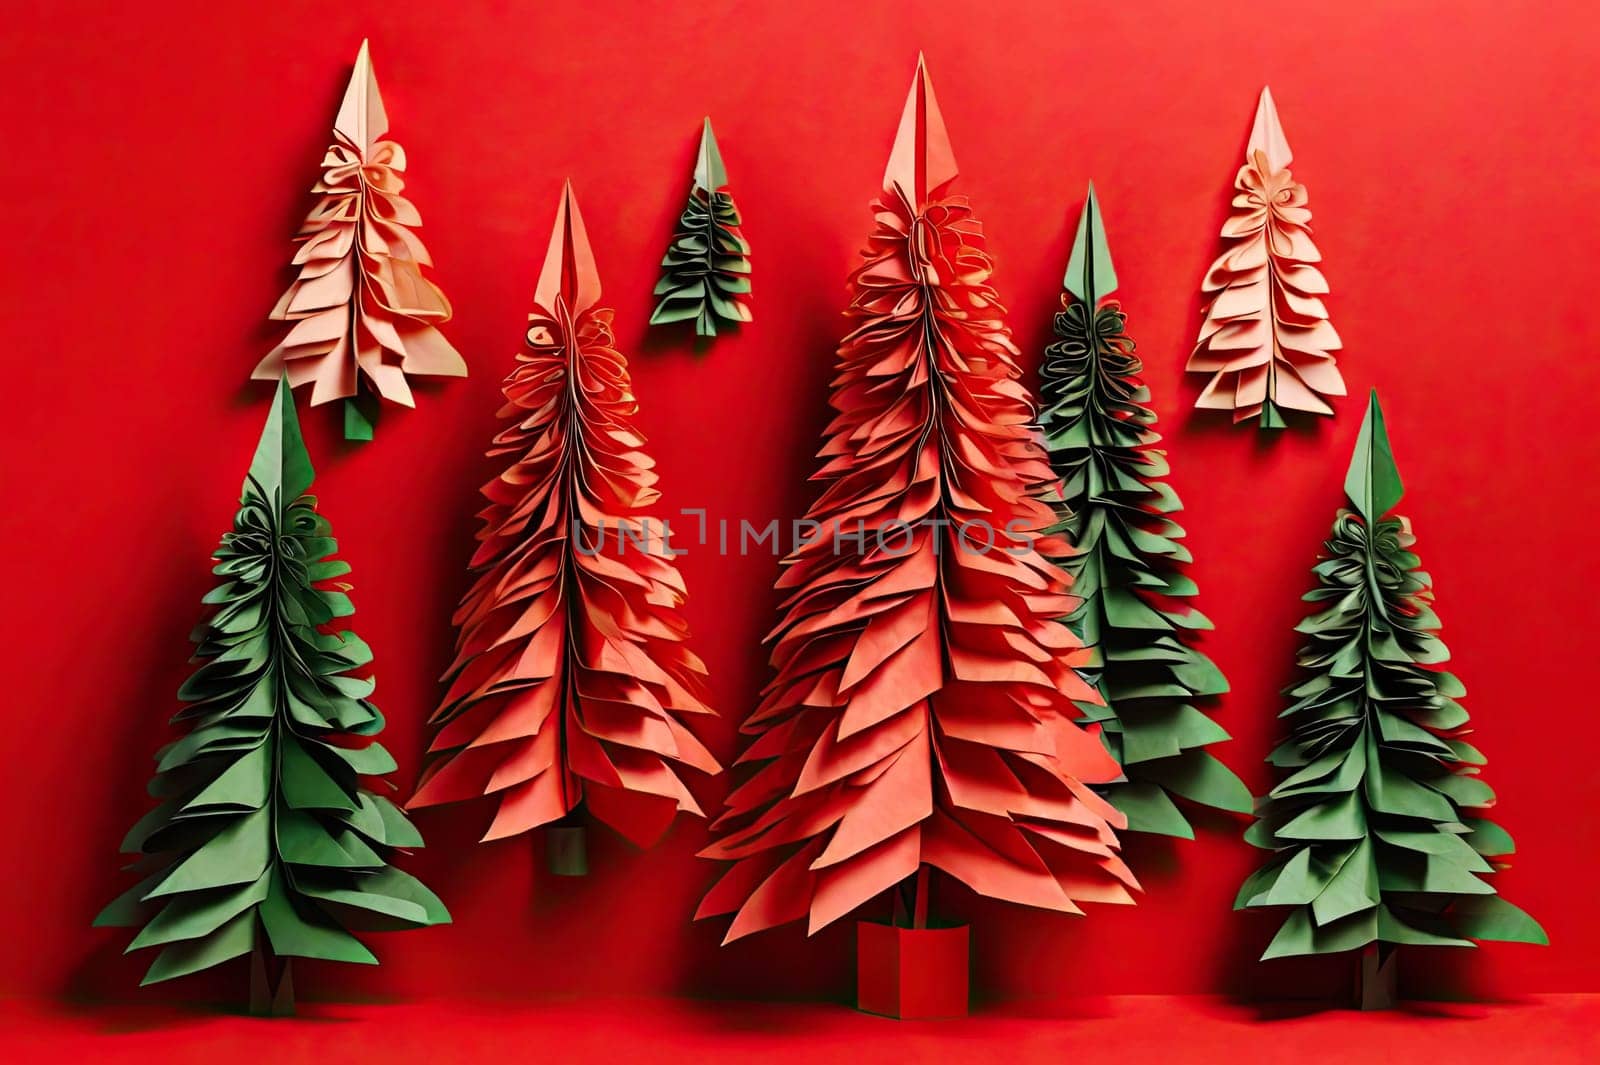  Christmas trees made of handmade paper. Creative Chirstmas background